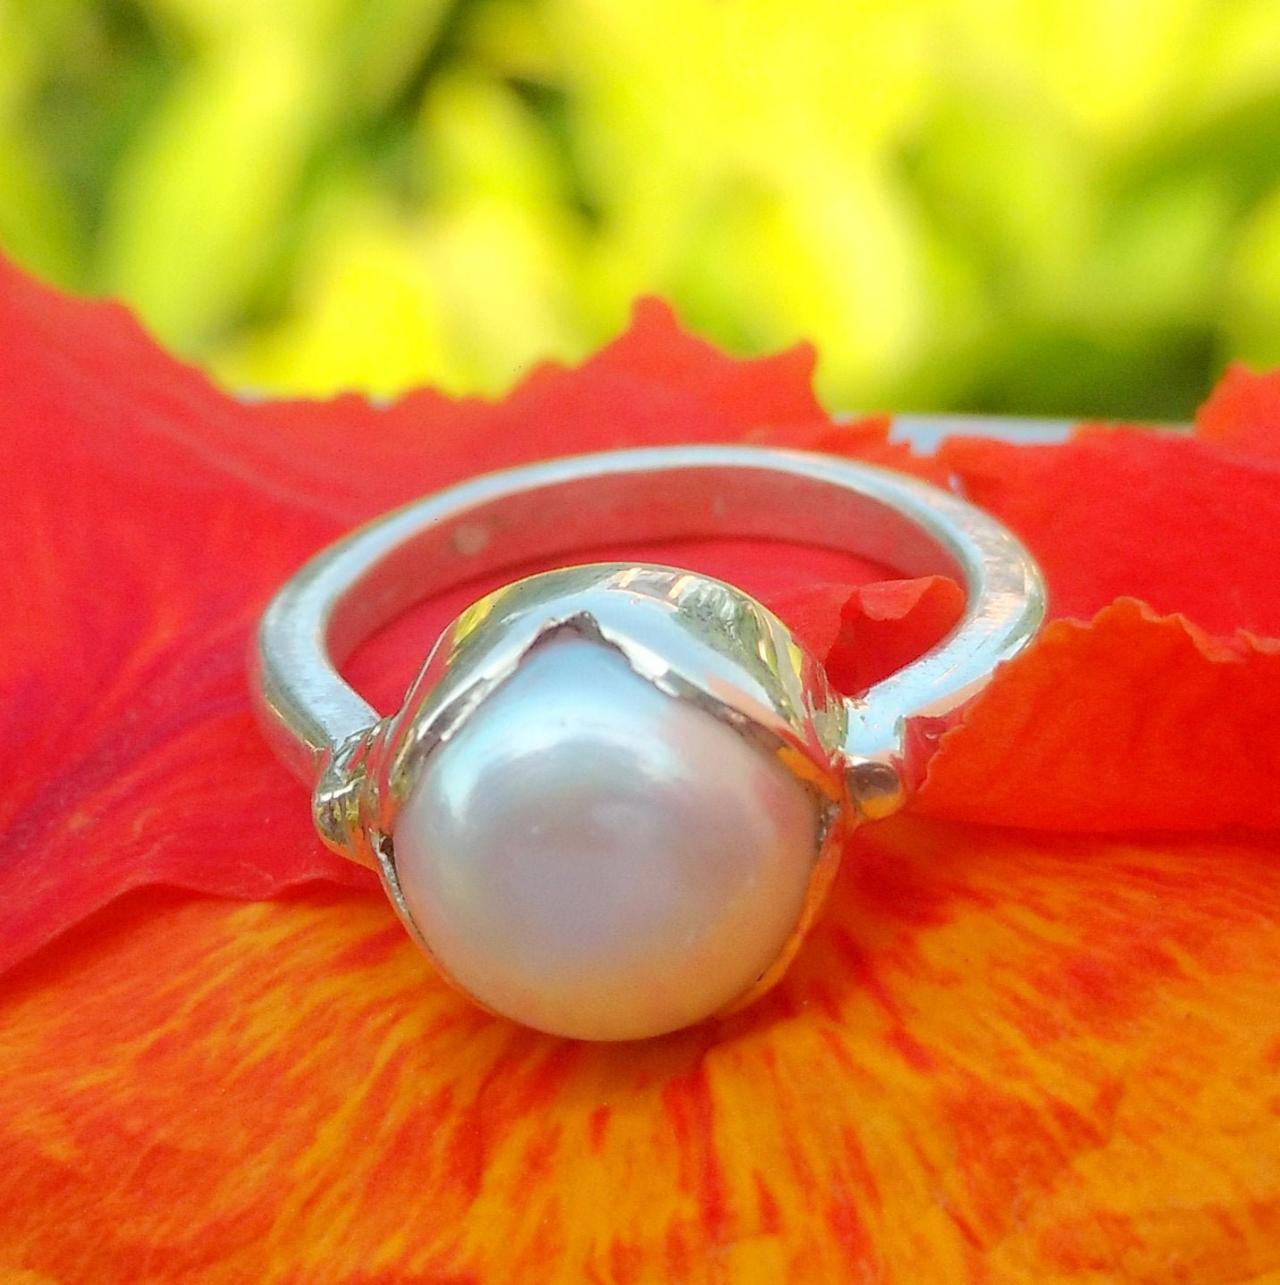 Handmade Pearl Ring, Gemstone Ring, Sterling Silver Ring, Simple Ring, Vintage Jewelry, Antique Pearl Ring, Unisex Ring, Knuckle Ring, Zodiac